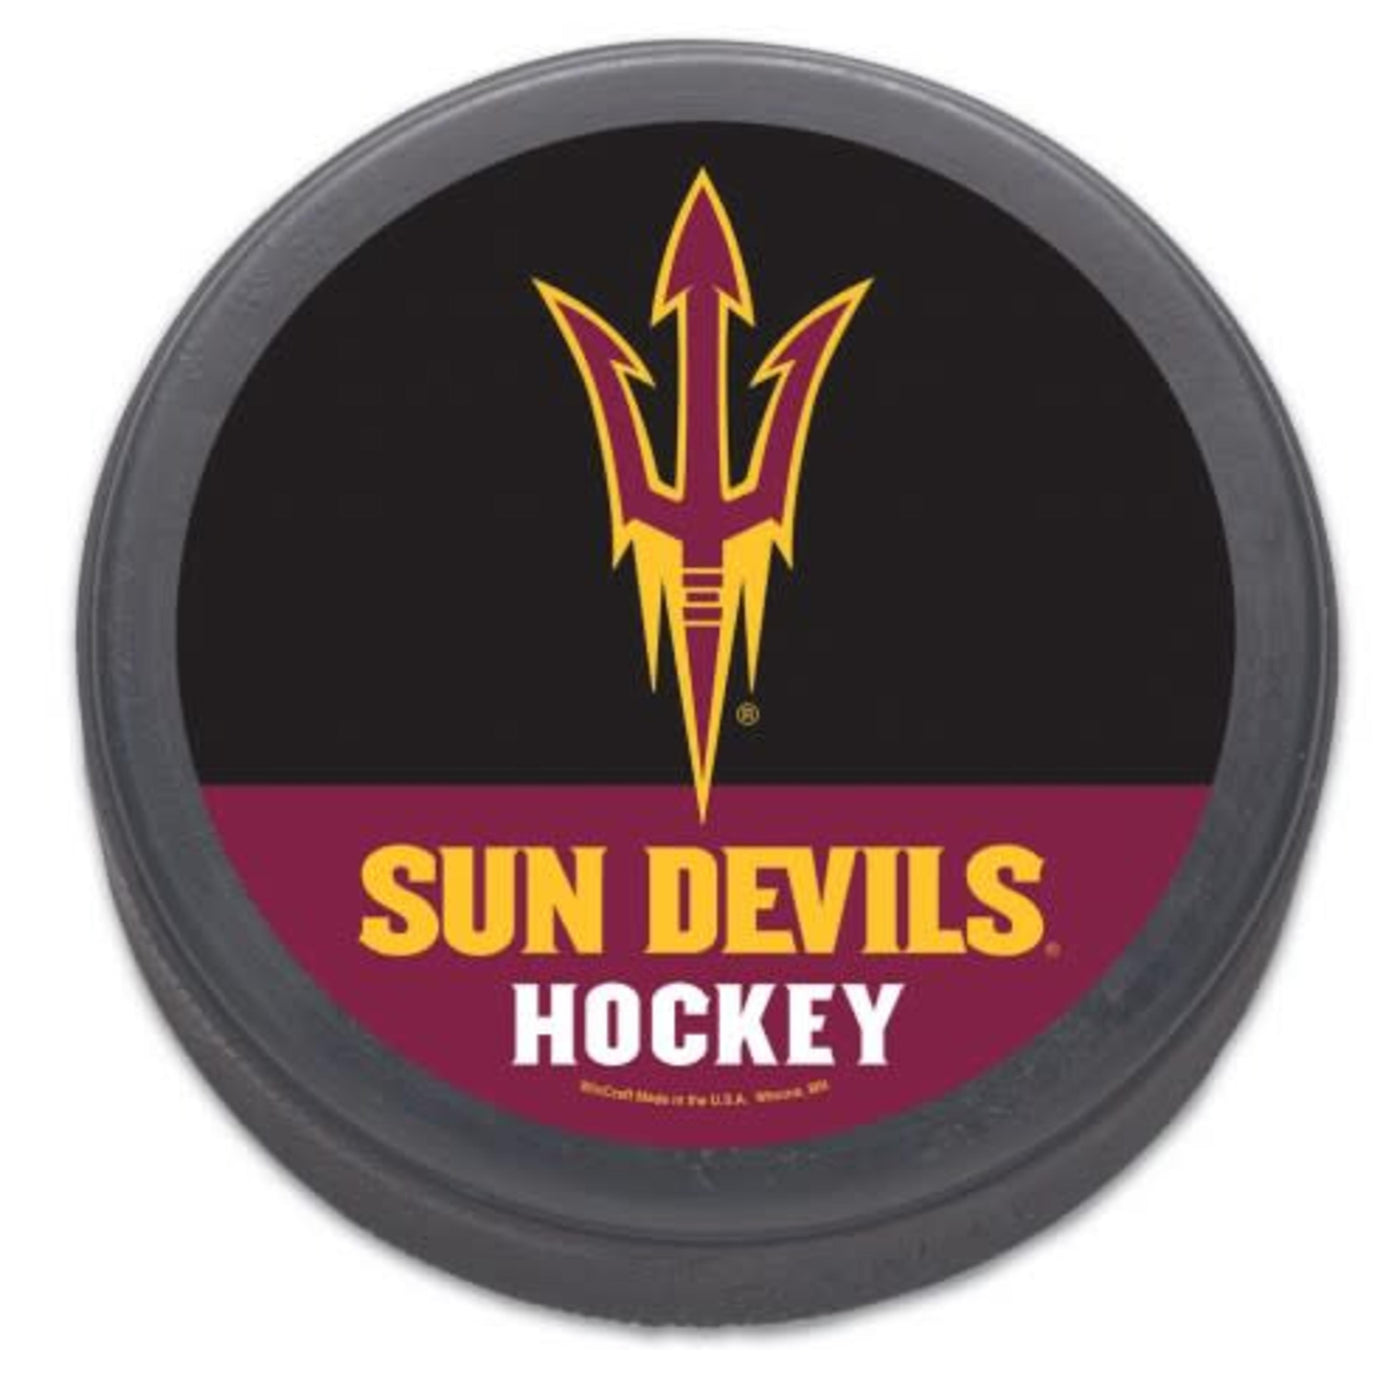 ASU hockey puck with a pitchfork above 'Sun Devils Hockey' lettering